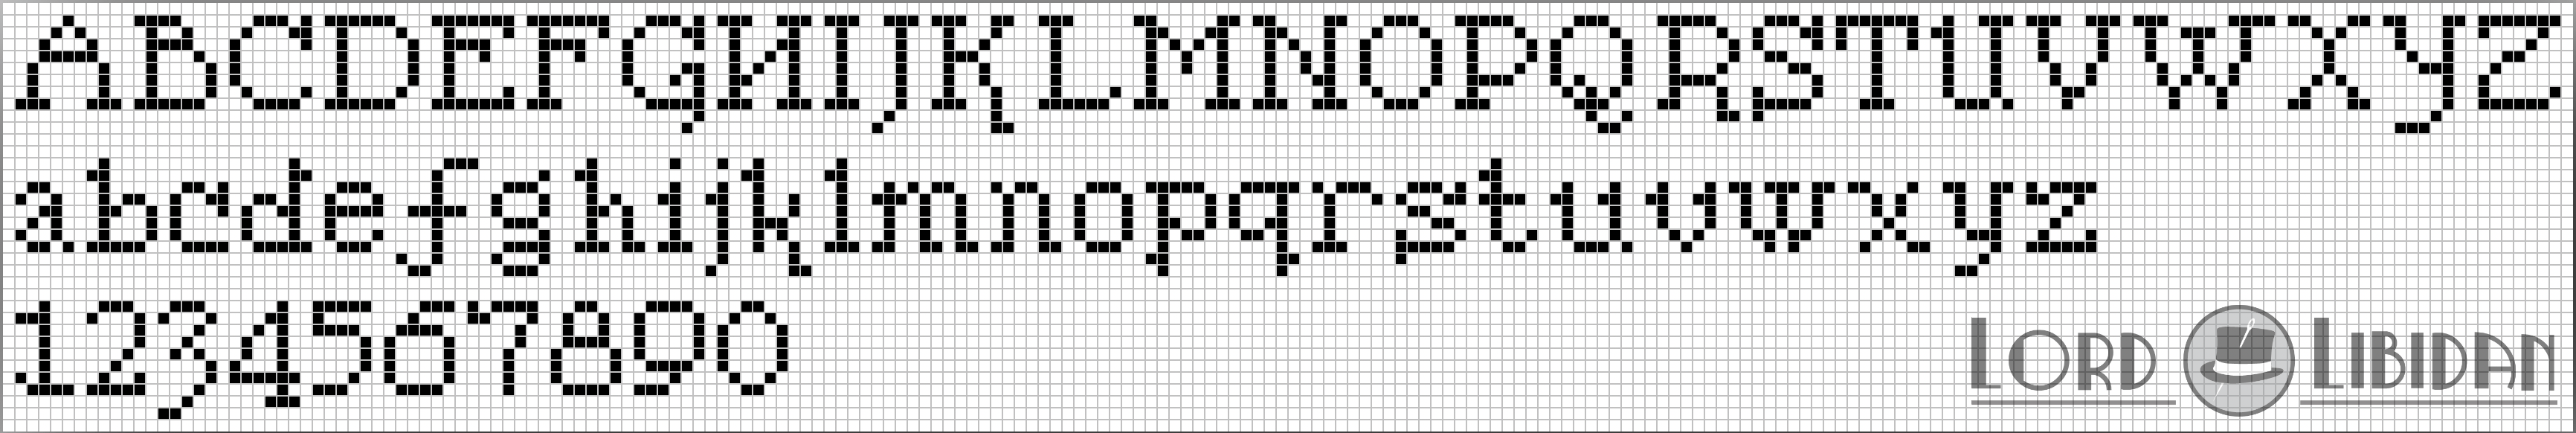 Traditional Cross Stitch Alphabet Pattern Free Download by Lord Libidan